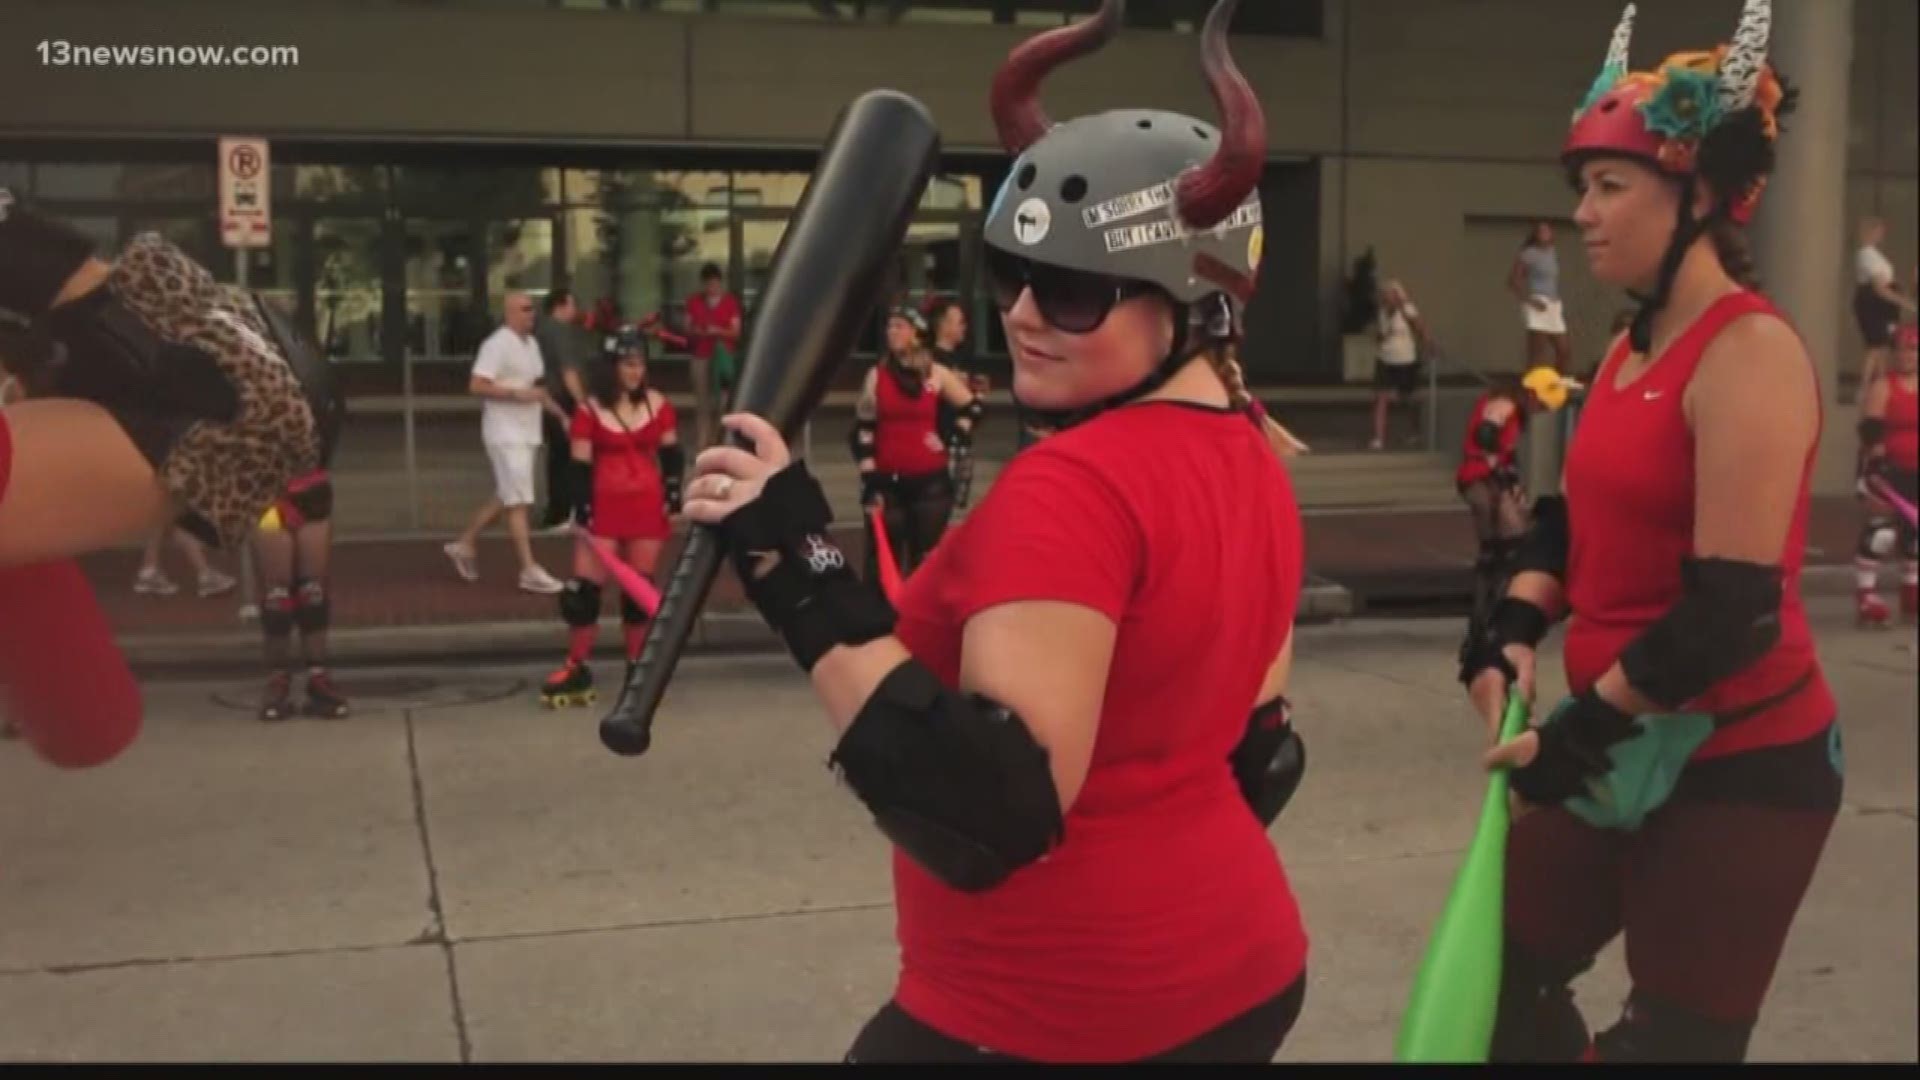 The event is inspired by the Running with the Bulls festival that takes place every year in Spain and Portugal. Contestants will run from Dominion Derby girls on skates armed with wiffle bats.